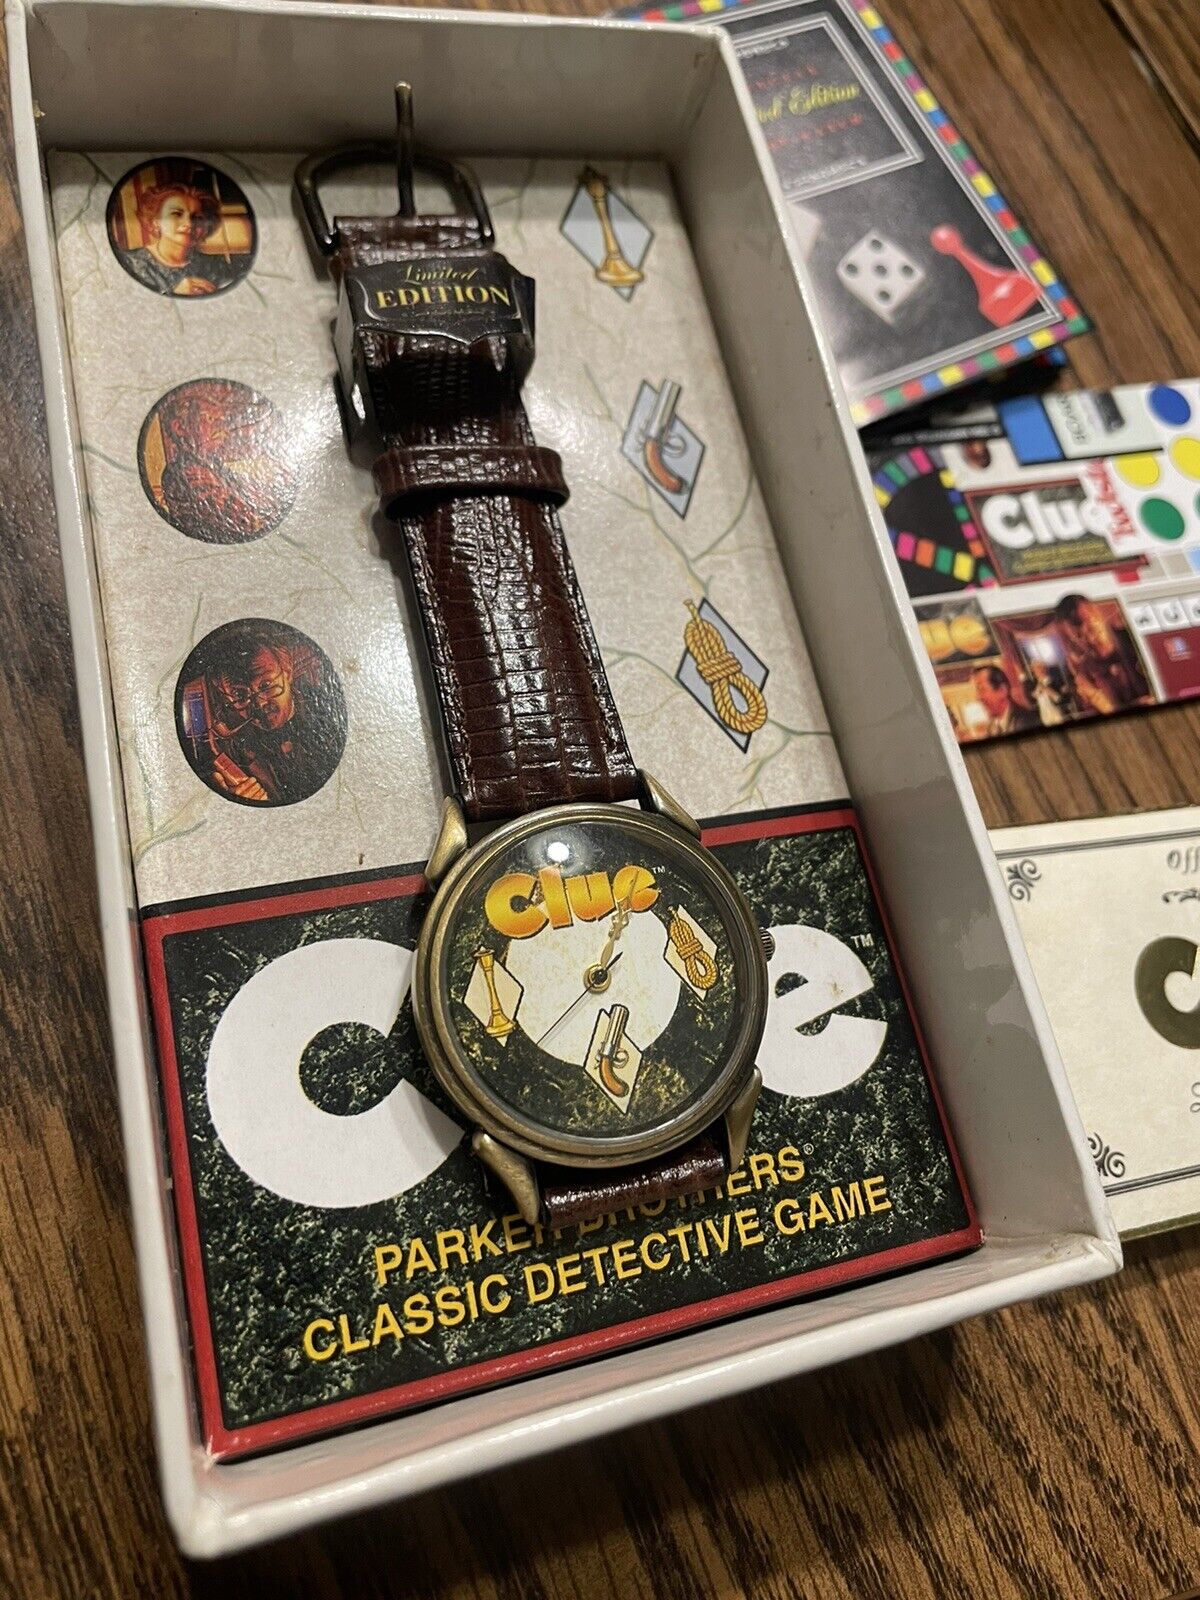 VTG Milton Bradley Parker Brothers Clue Limited Edition Watch 1720/10,000 1994